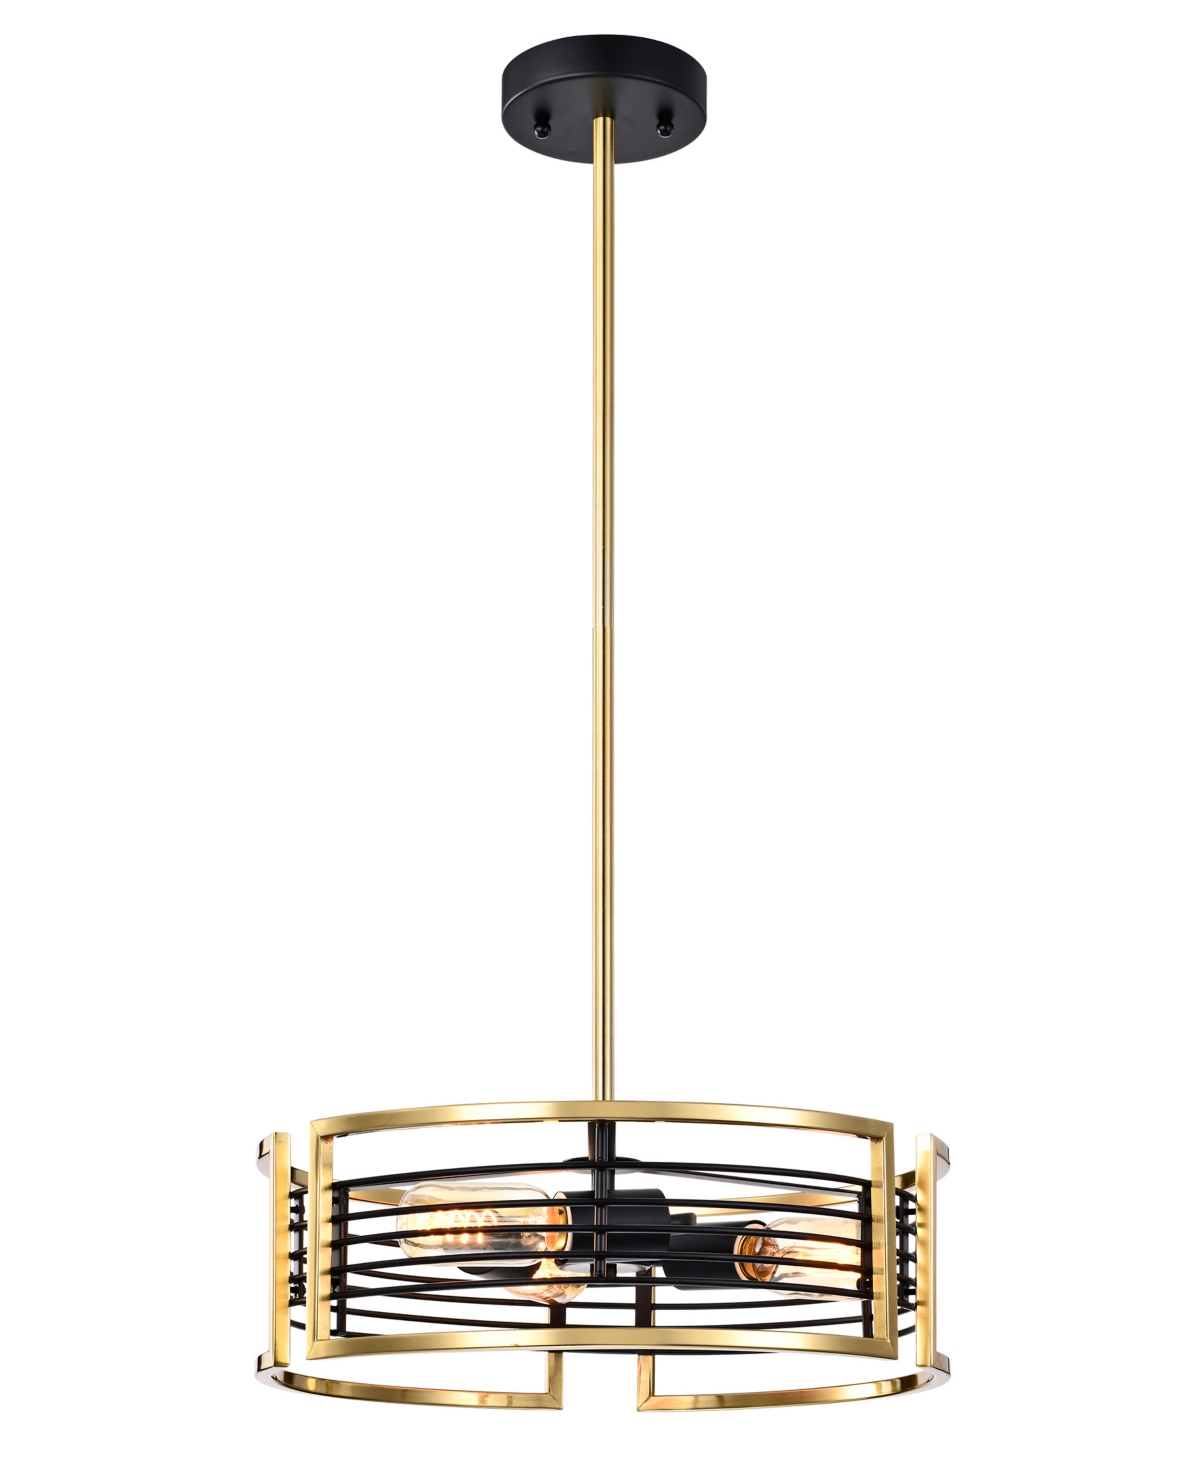 Home Accessories Milly 15" Indoor Finish Chandelier With Light Kit In Brass And Matte Black